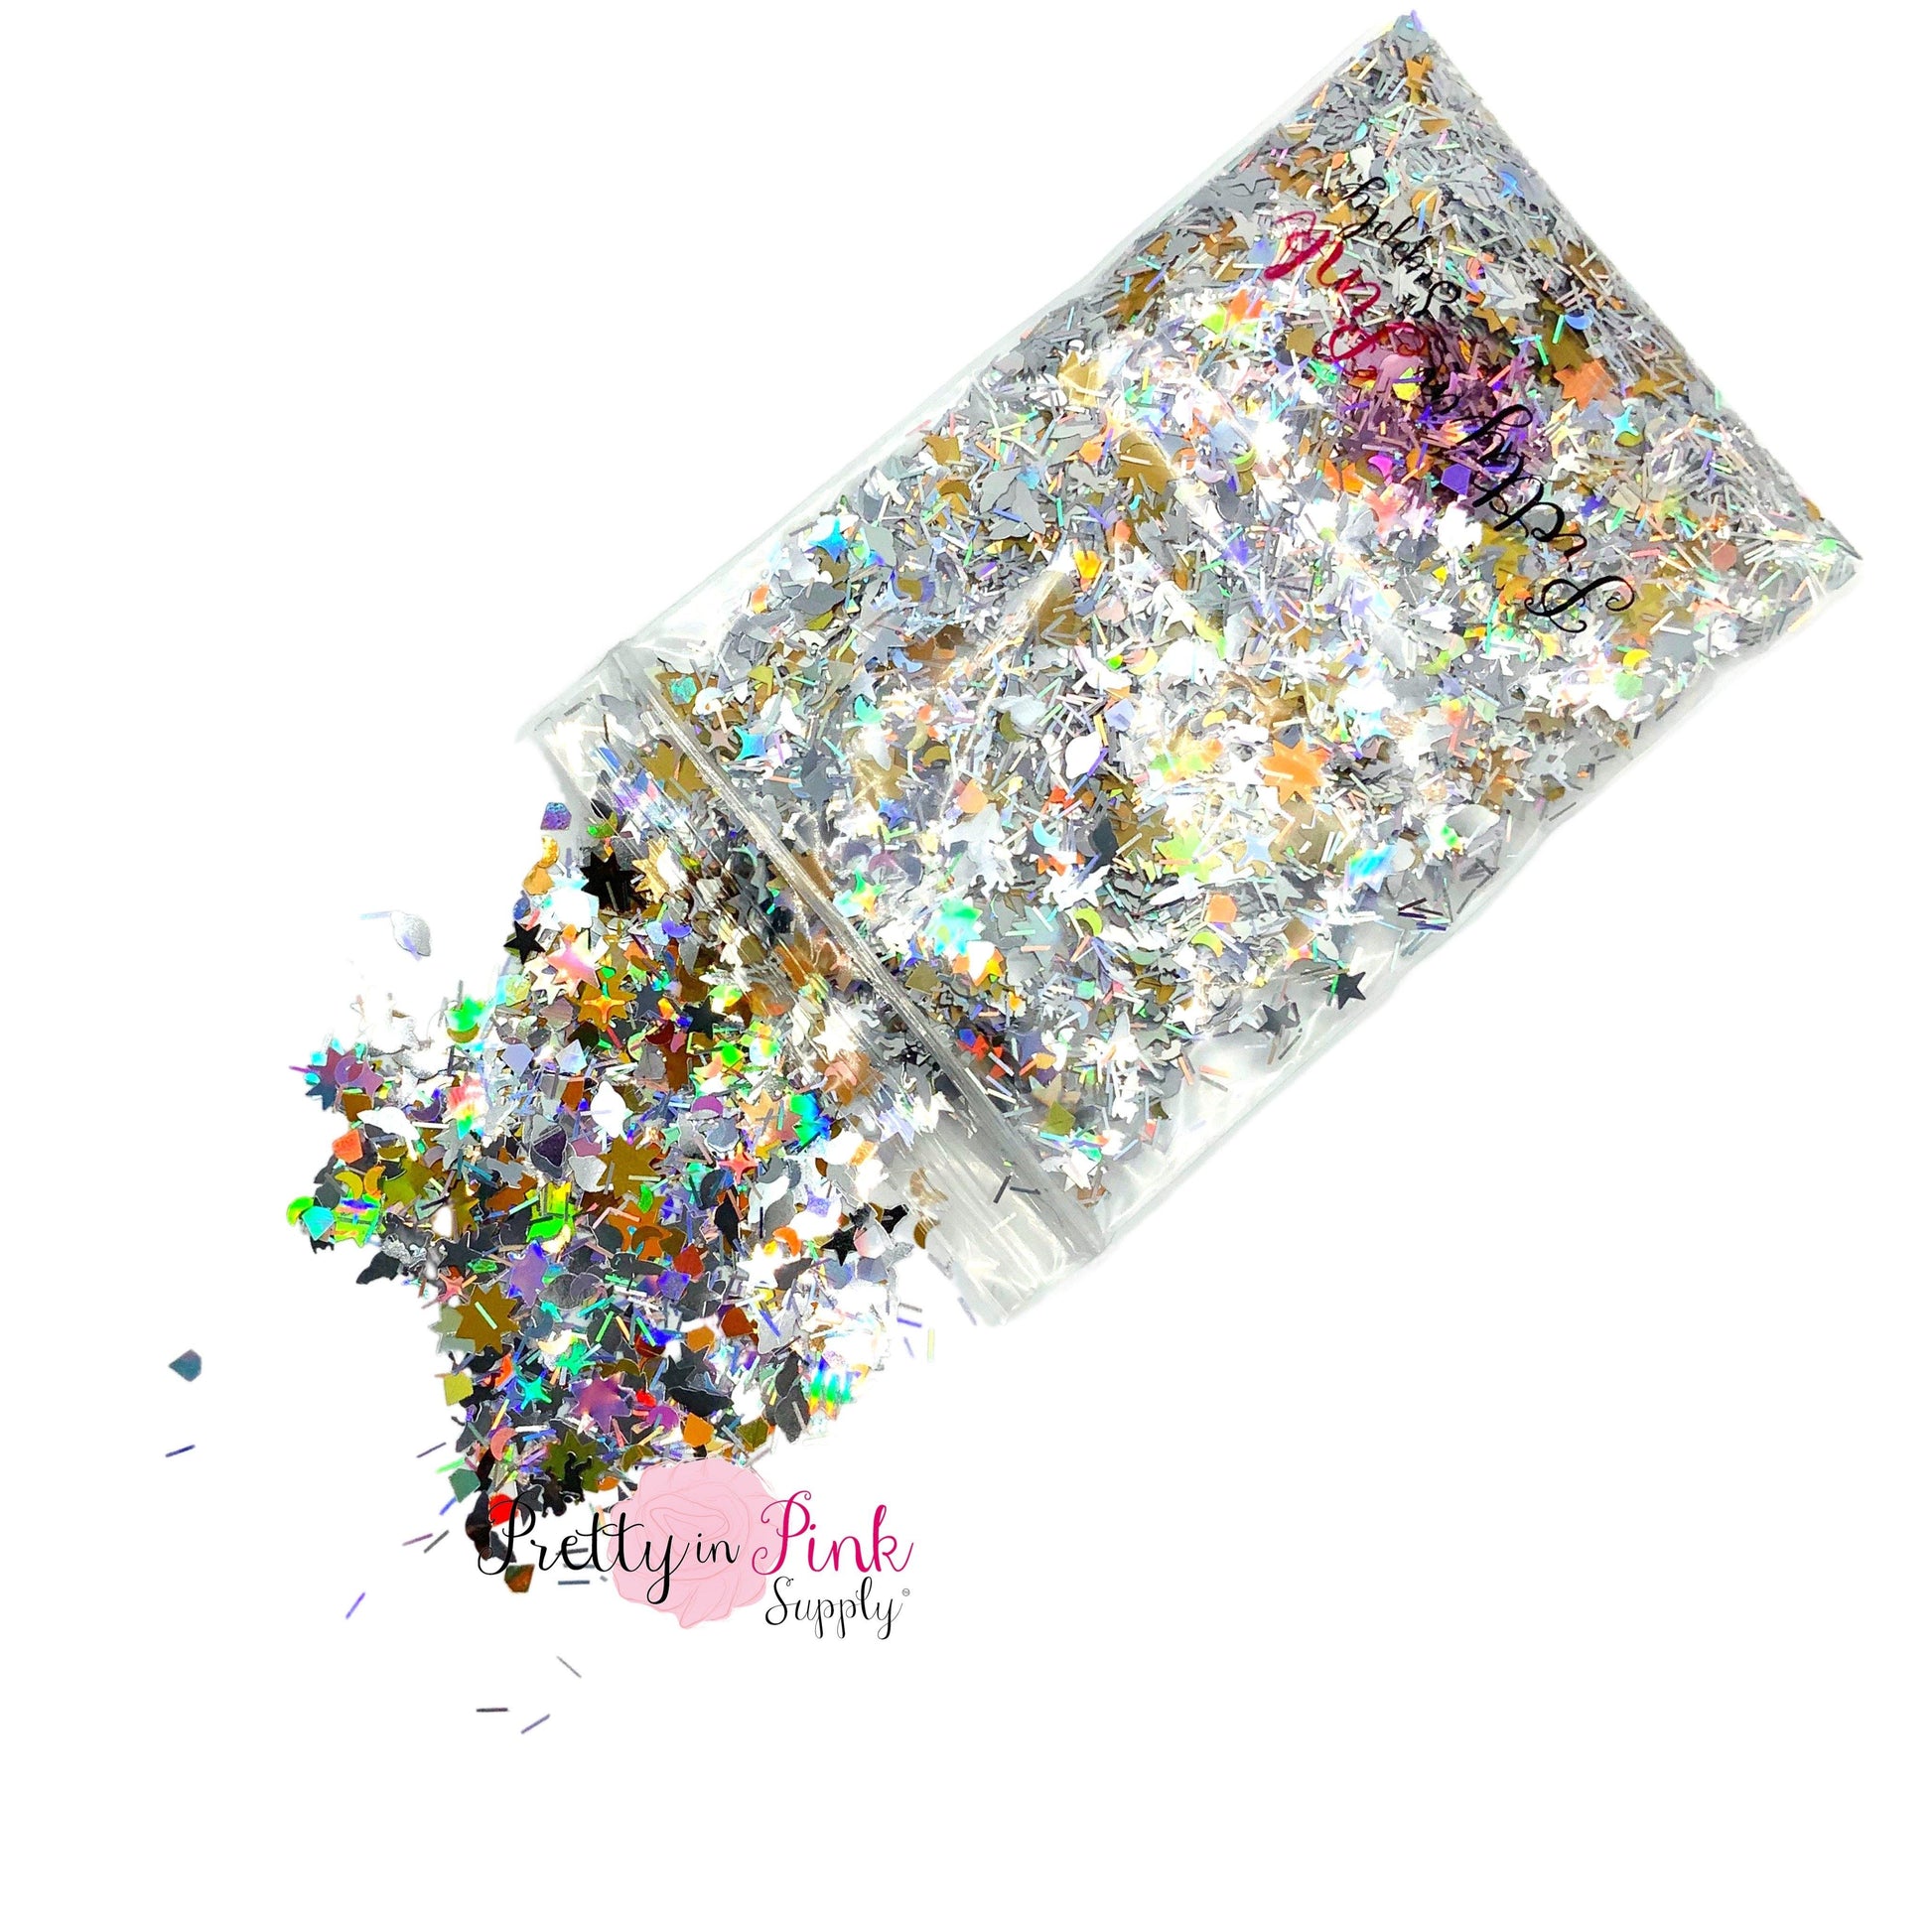 Spilling bag of holographic silver and gold chunky/fine glitter with shapes of stars, spaceships, astronauts, planets, moons, and flakes.